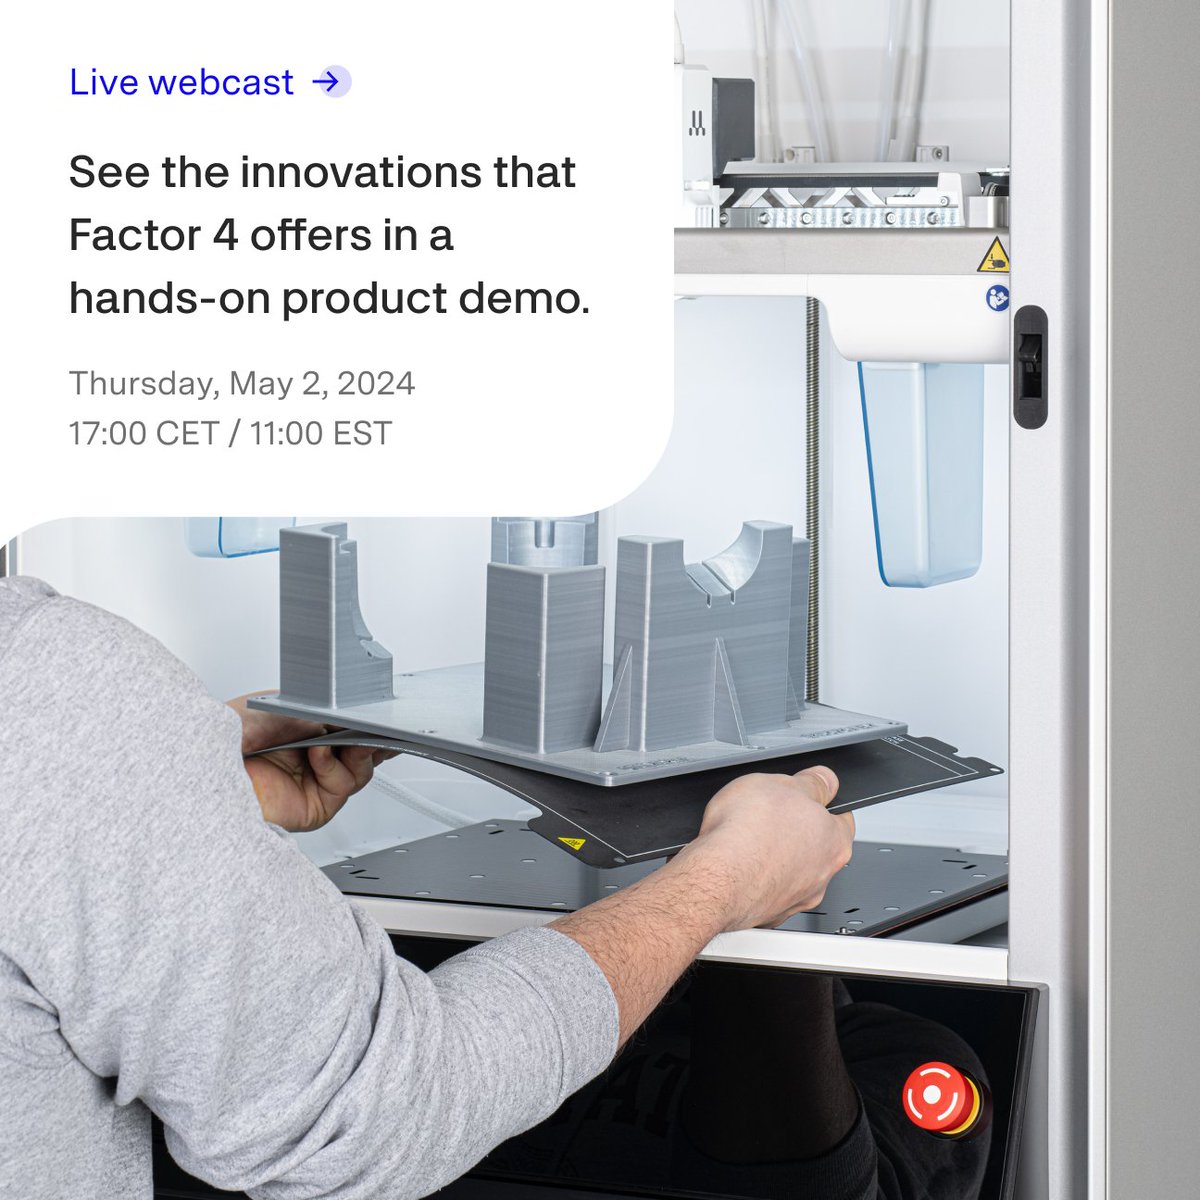 Meet the new UltiMaker Factor 4. Join us on May 2nd at 11:00 ET / 17:00 CET for a live demo of our industrial-grade #3Dprinting solution. Direct drive dual extrusion, triple insulated build volume, climate controlled automated material handling, and more! explore.ultimaker.com/Factor4Showcas…